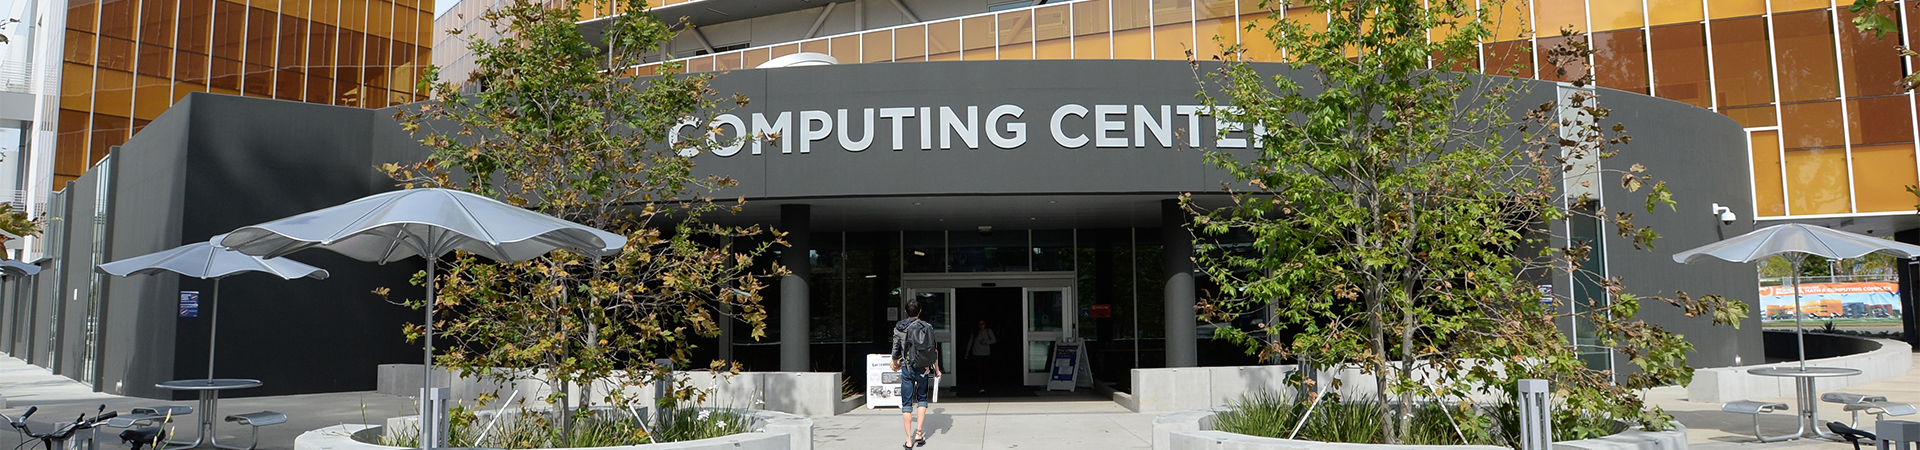 Computer Center sign shown on building